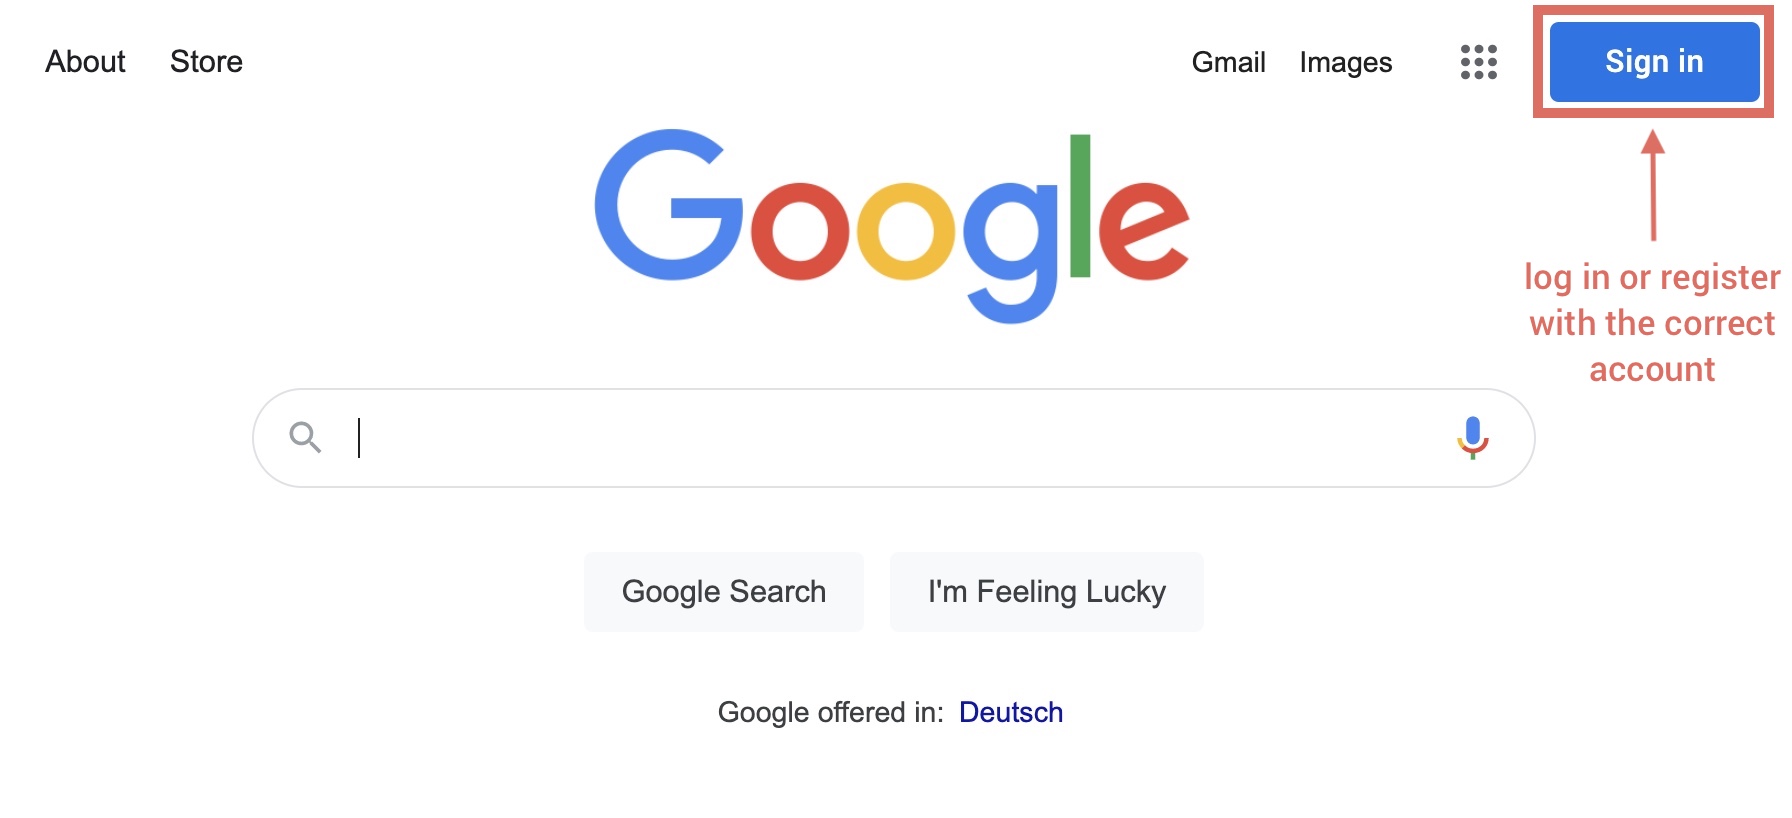 You can see a screenshot of the Google Search home page. Here, next to the Google logo and the search bar, you'll find a blue button in the upper right corner that says "Sign in". There you can either sign in with your existing Google account or register a new one.